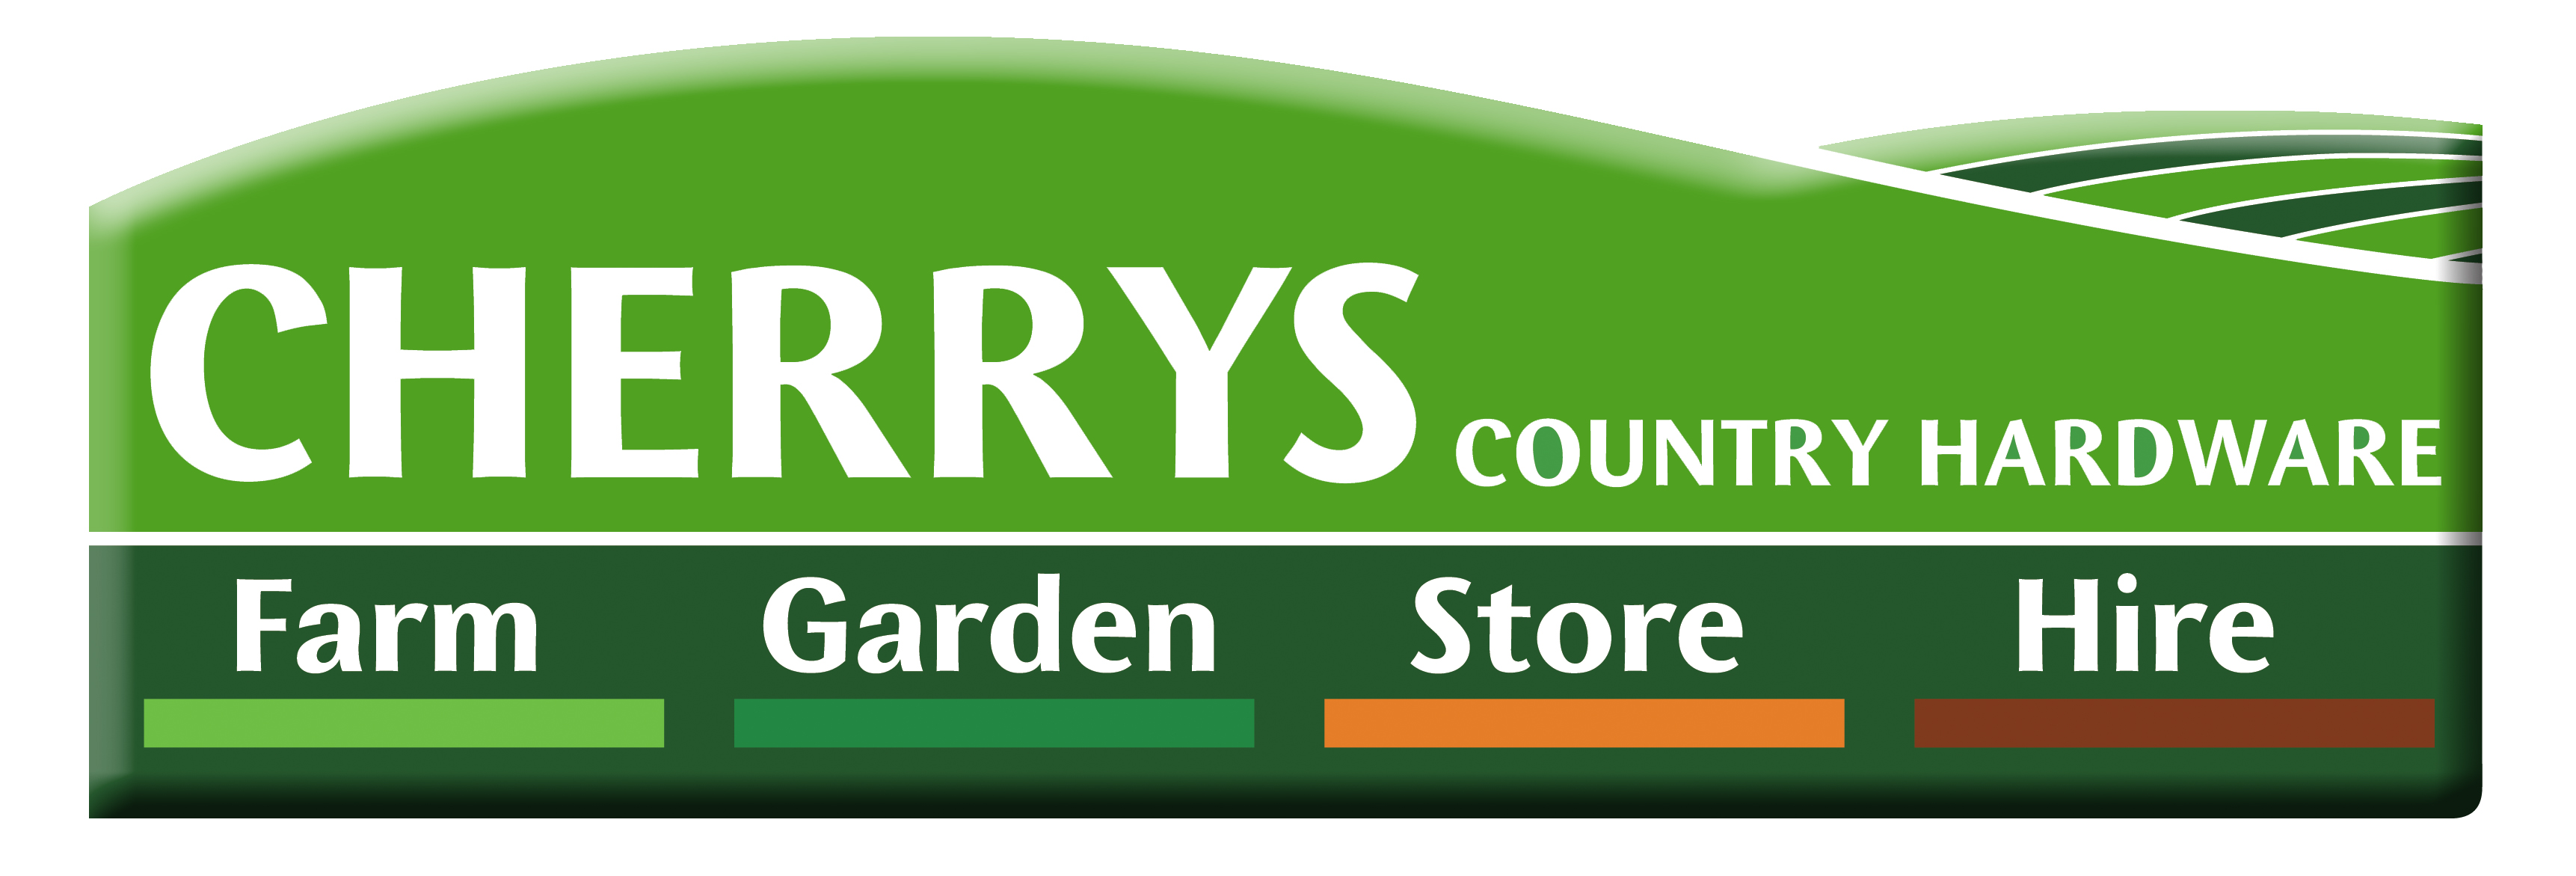 Cherrys Country Hardware